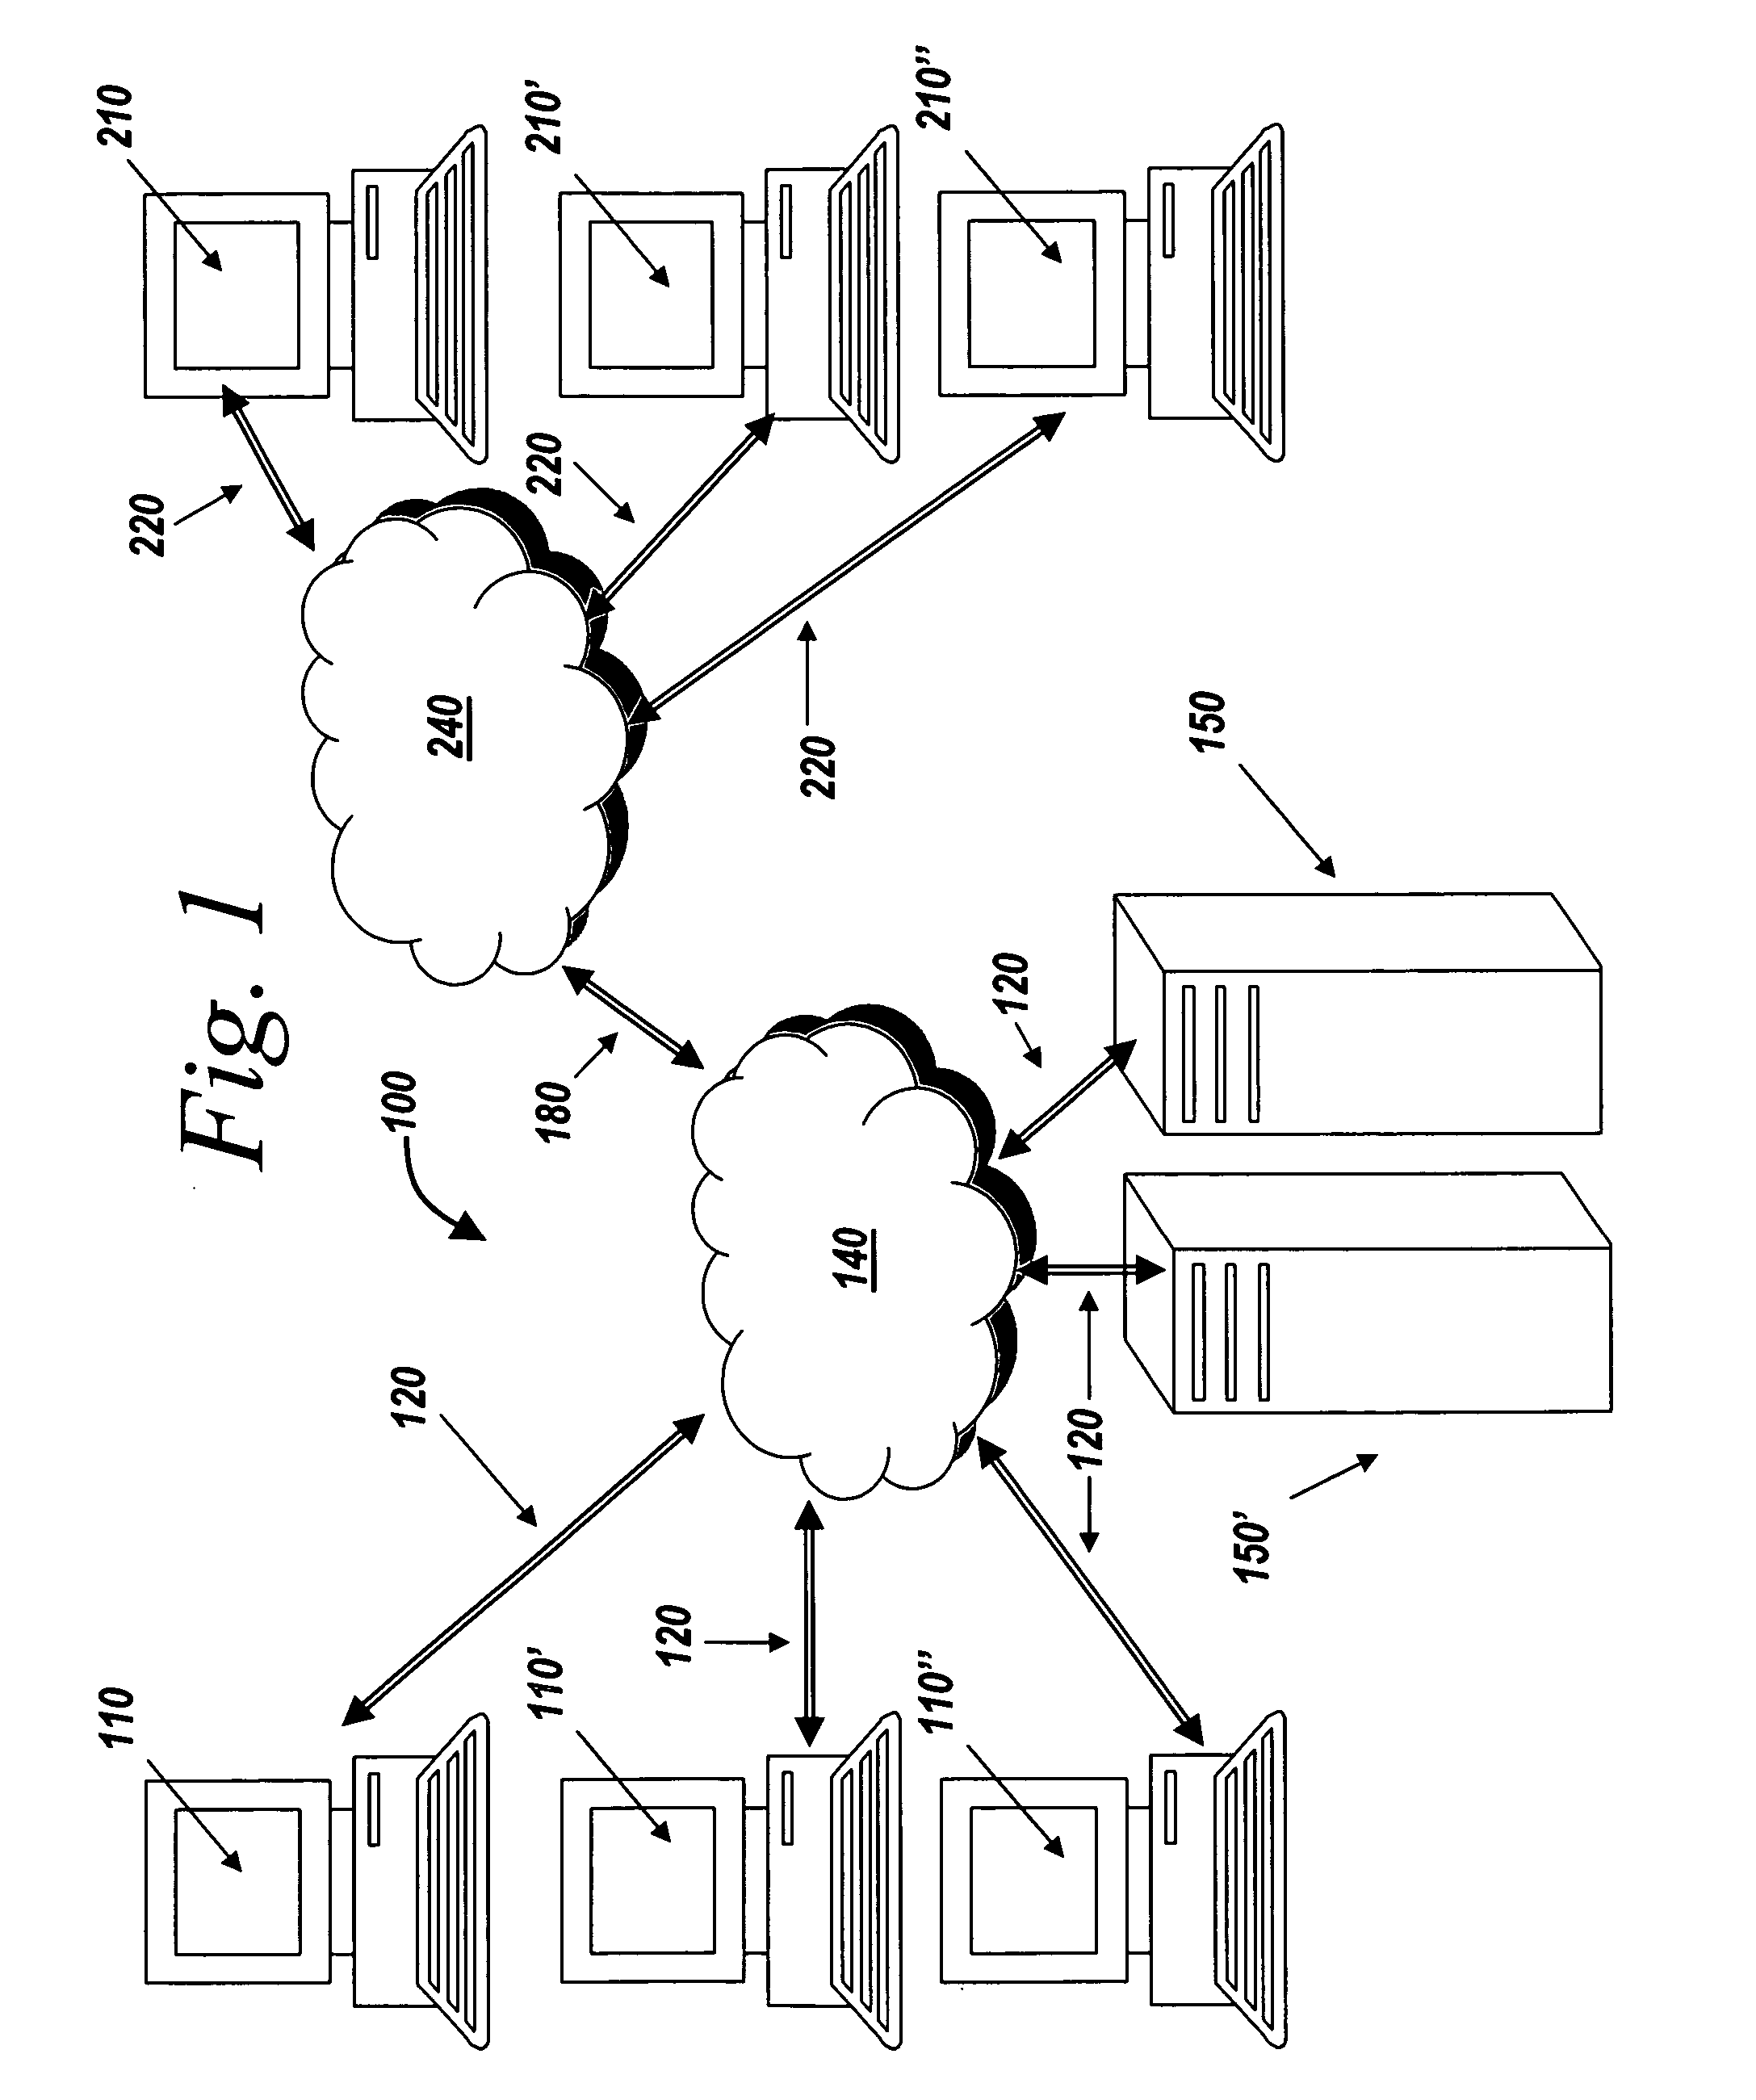 Systems and methods for expiring digital assets using encryption key